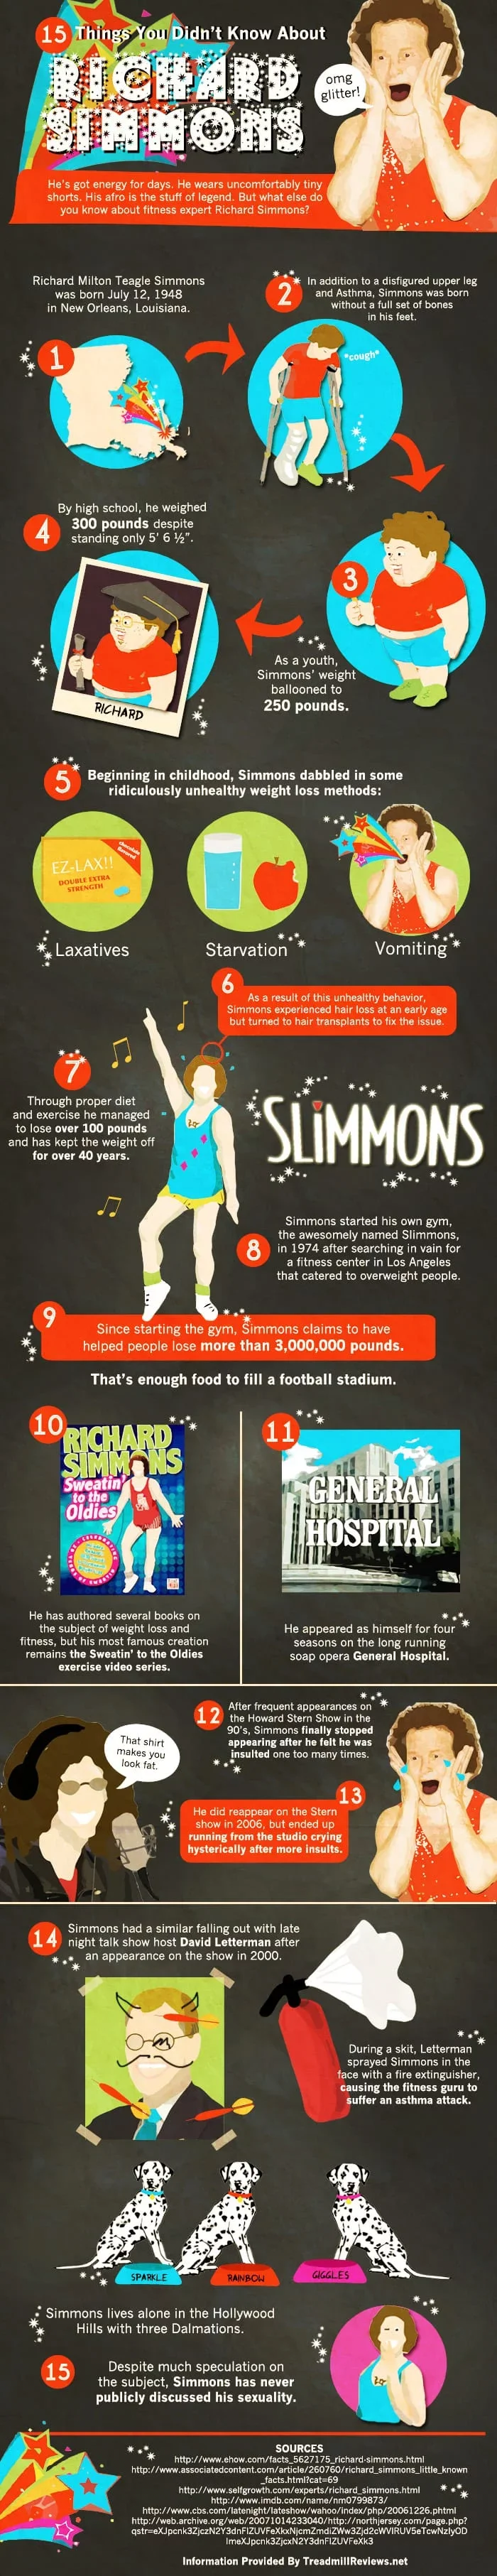 15 Facts about Richard Simmons - Infographic